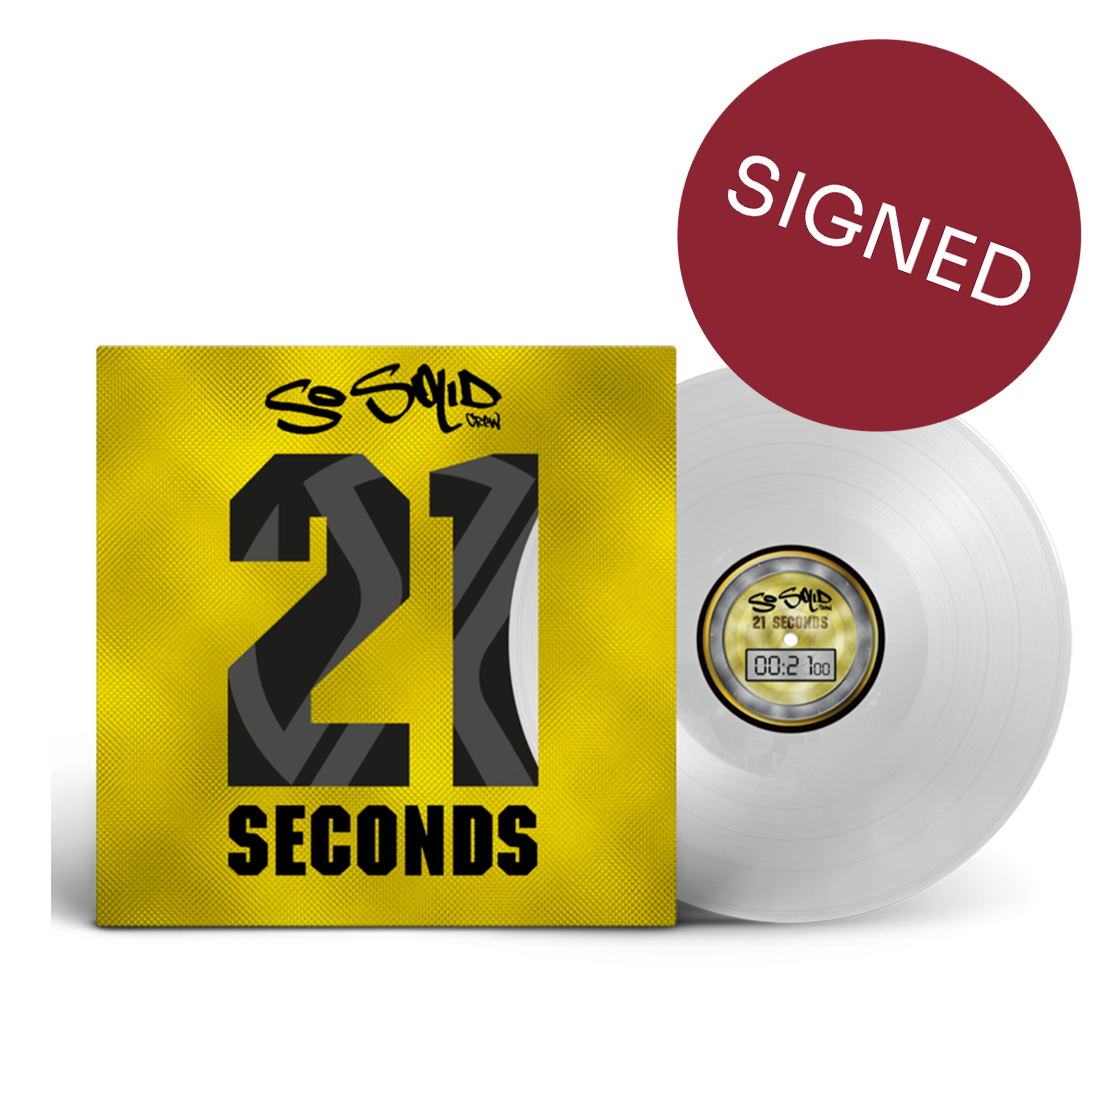 So Solid Crew - 21 Seconds: Exclusive Signed Ultra Clear 12" Vinyl